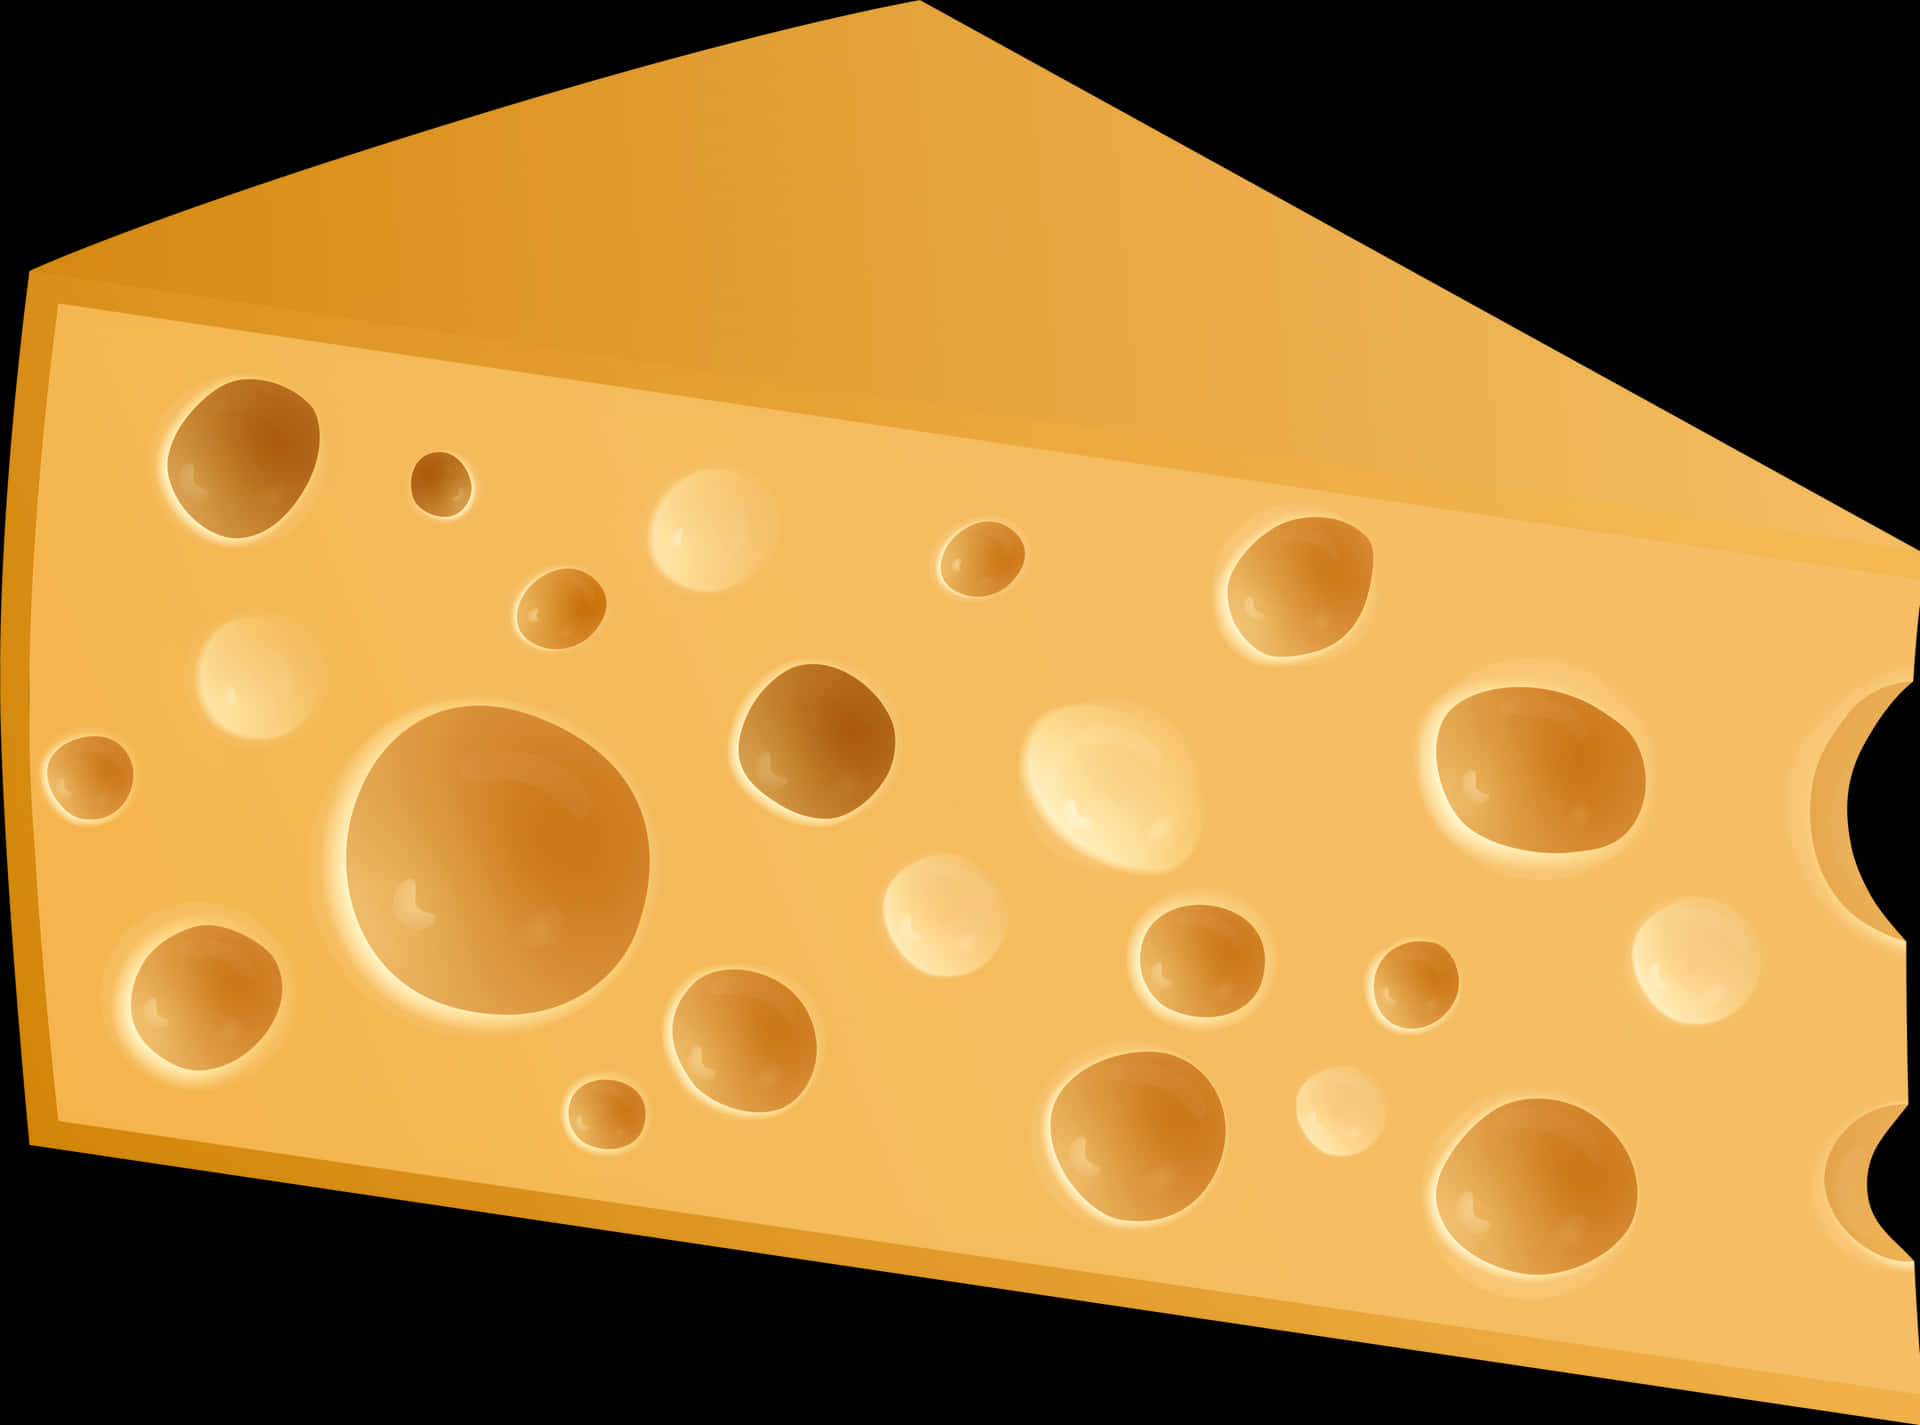 Swiss Cheese Wedge Illustration PNG